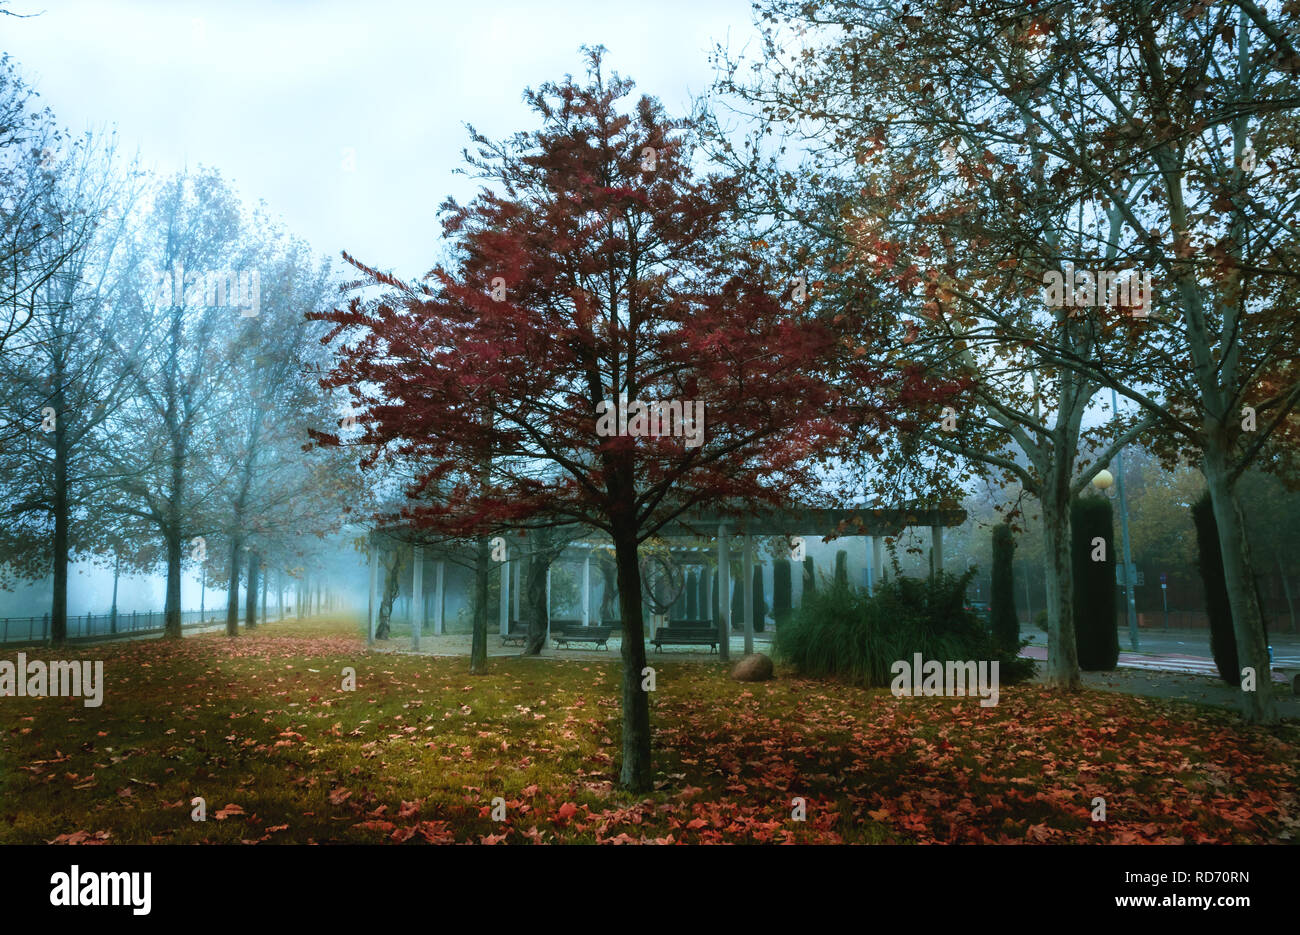 Winter landscape with fog, green trees and red and yellow leaves in a city park Stock Photo